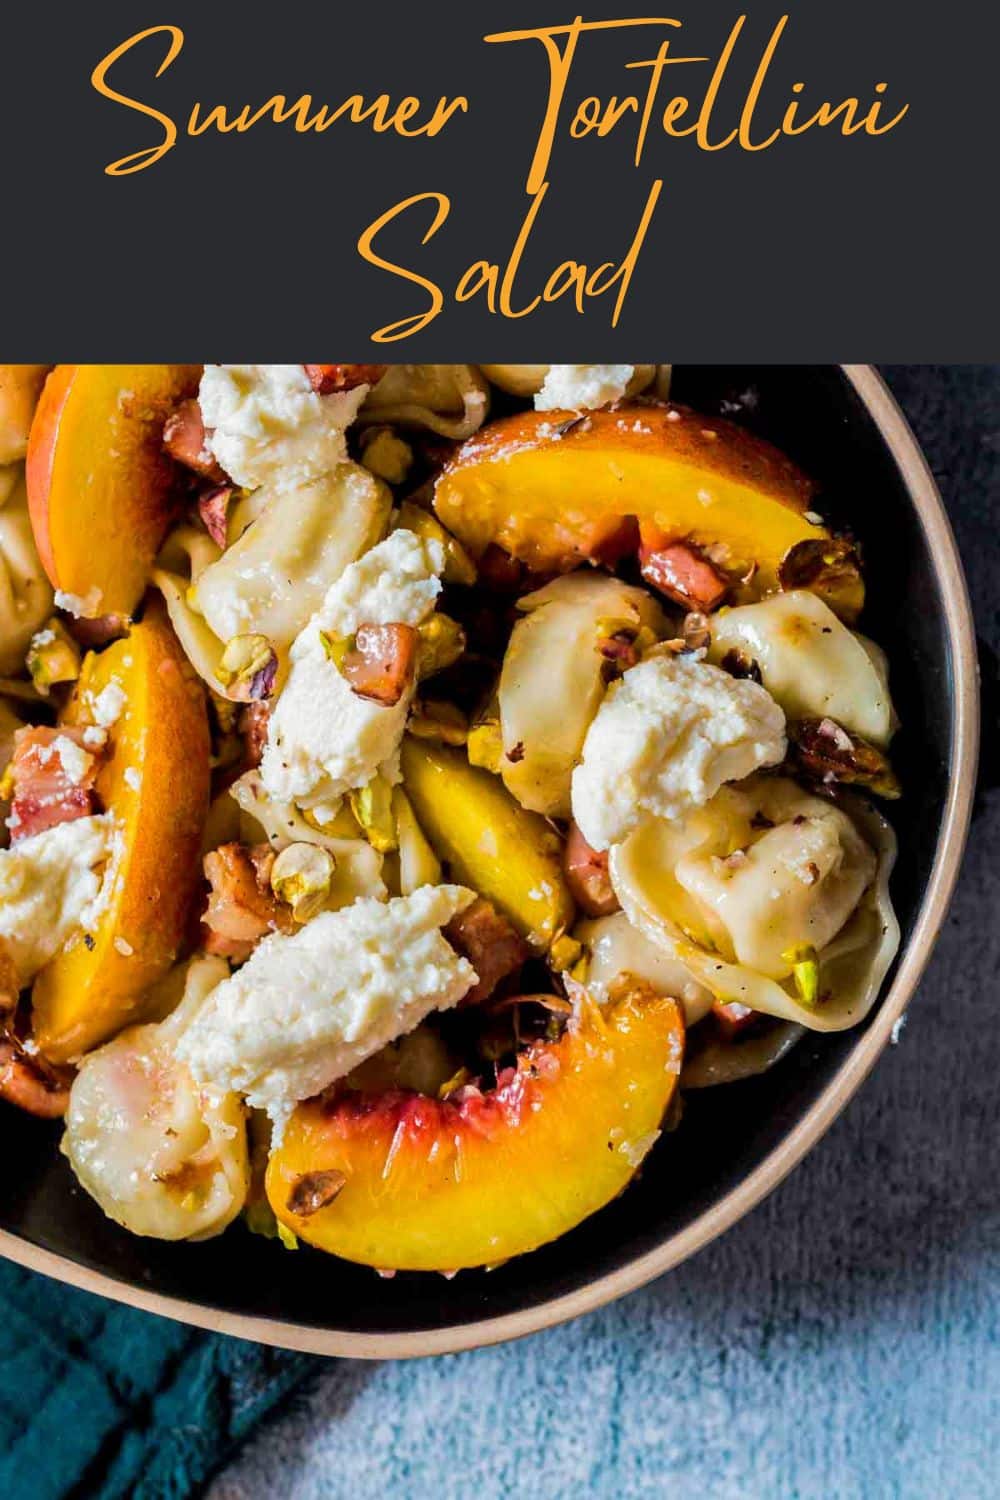 Summer Tortellini Salad with Grilled Peaches (Video)